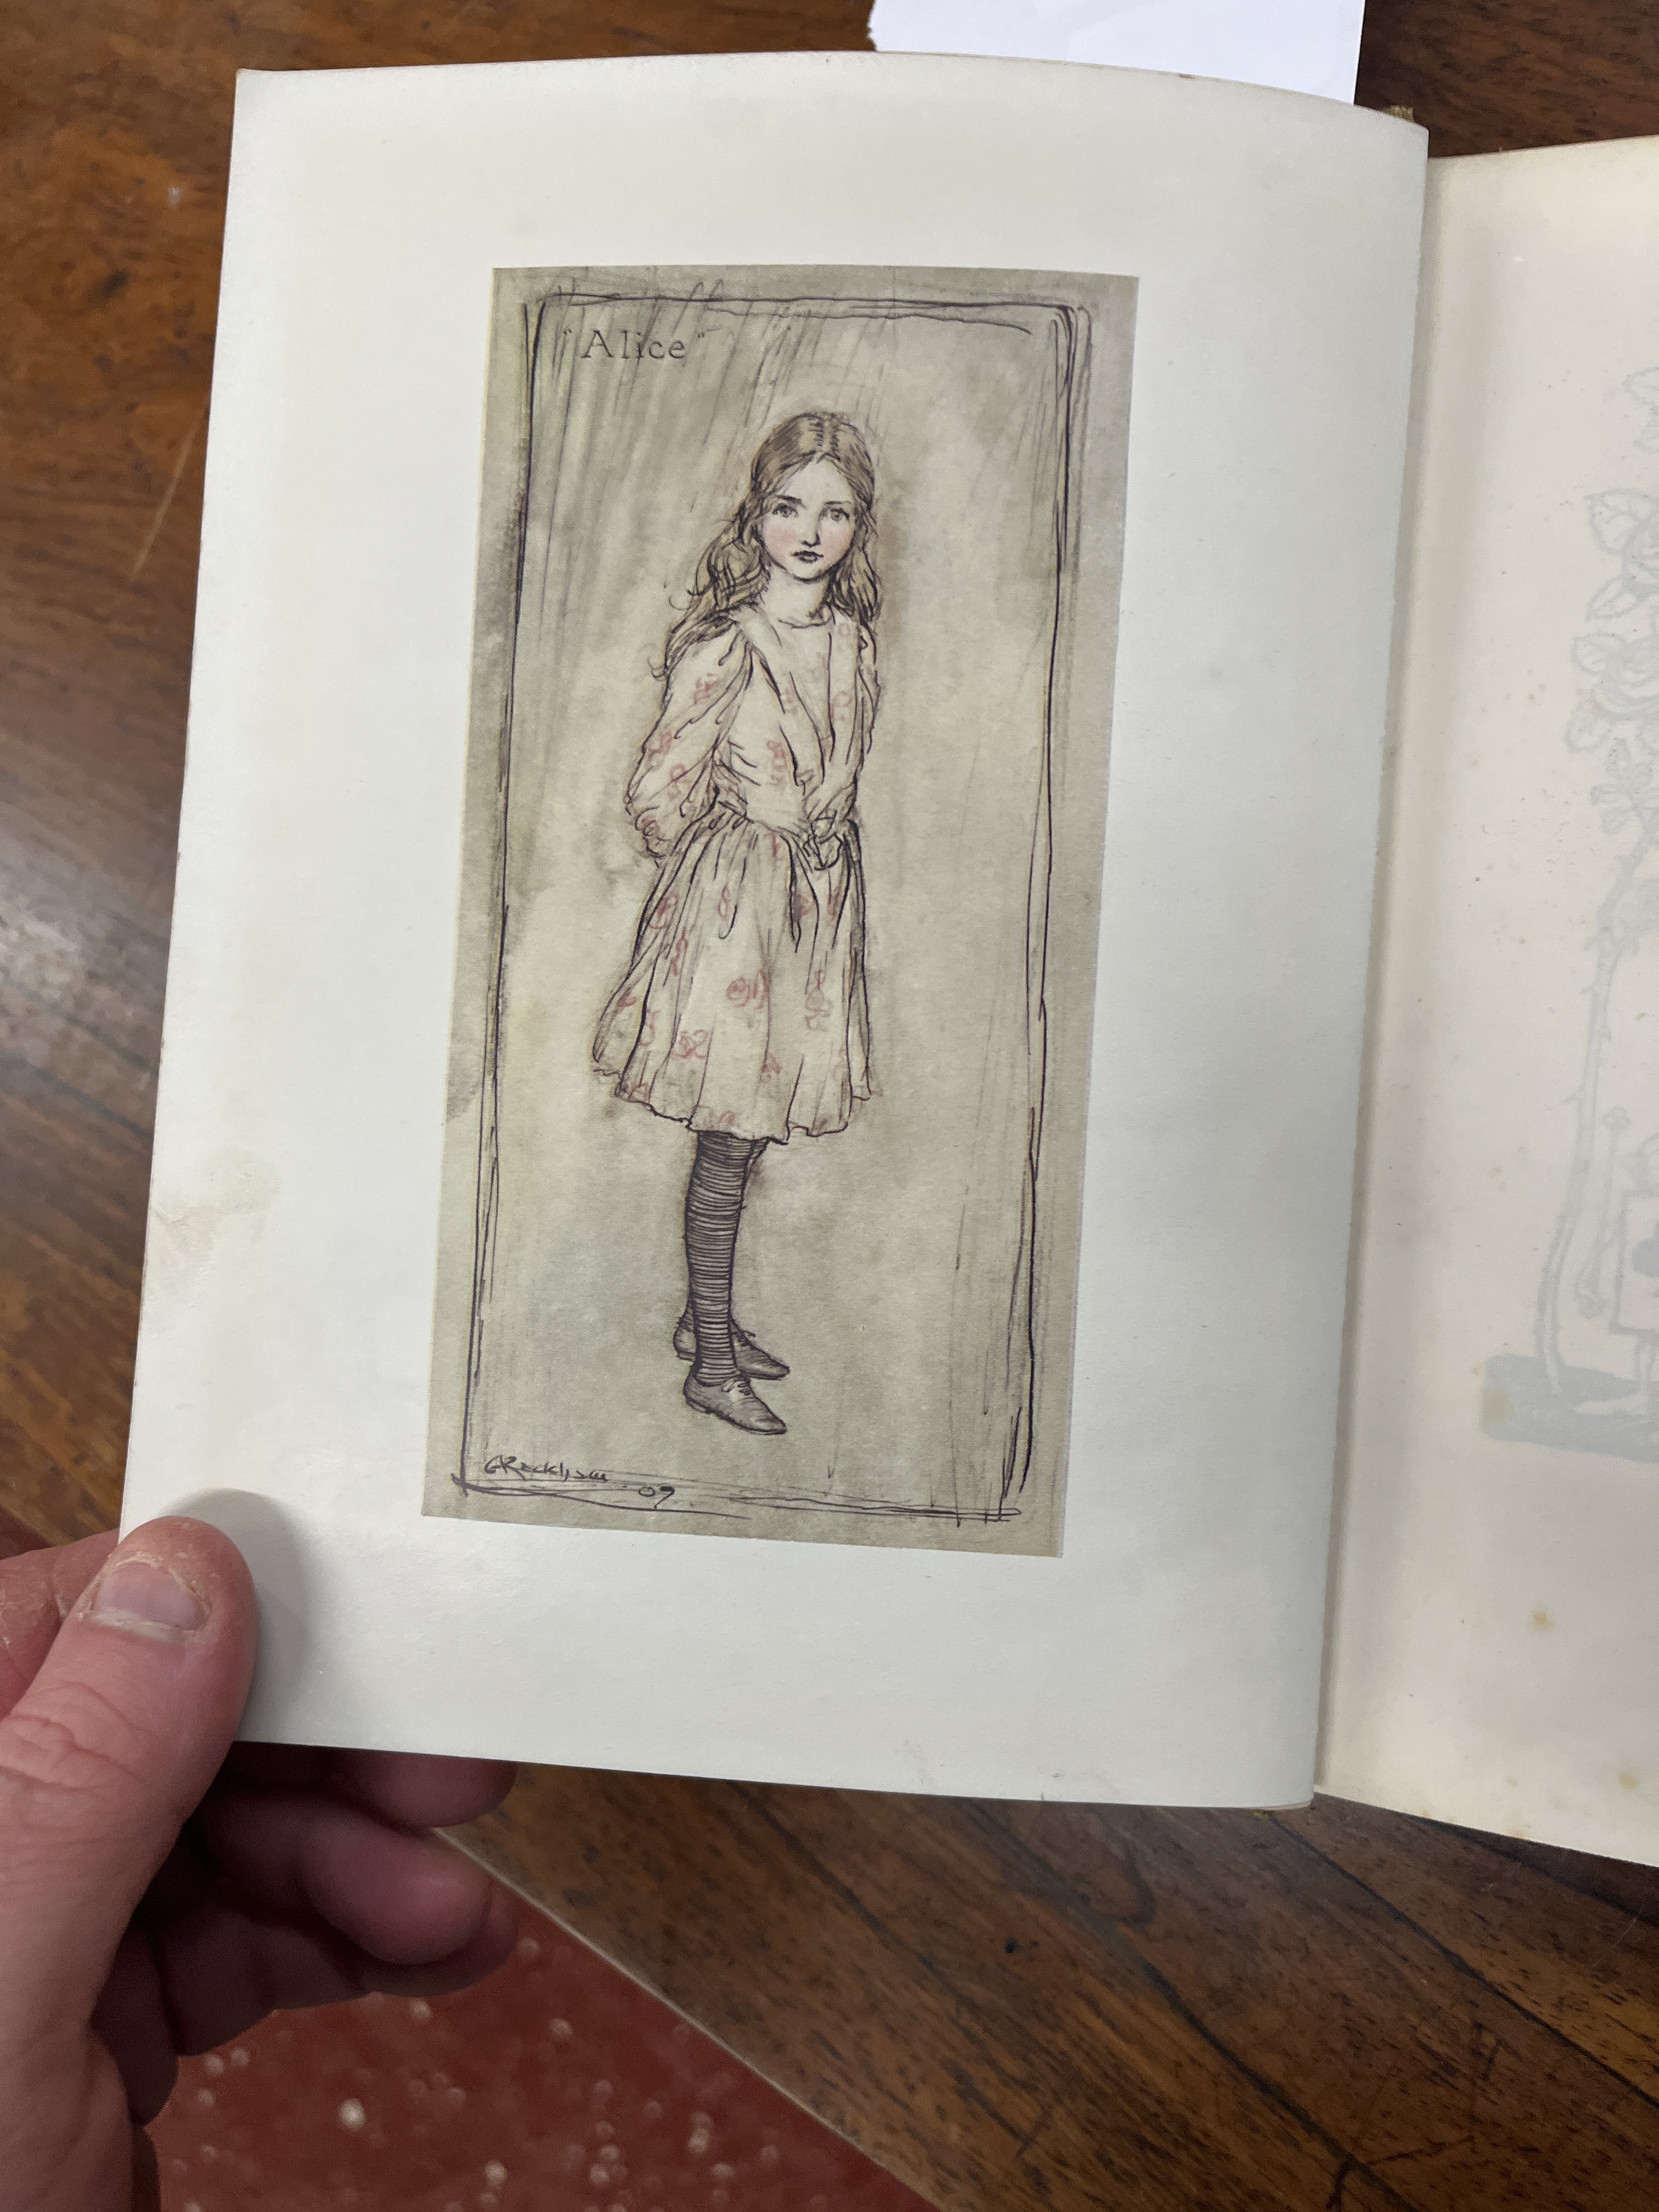 Adventures of Alice in Wonderland book 1907 edition illustrated by Arthur Rackham - Image 5 of 6